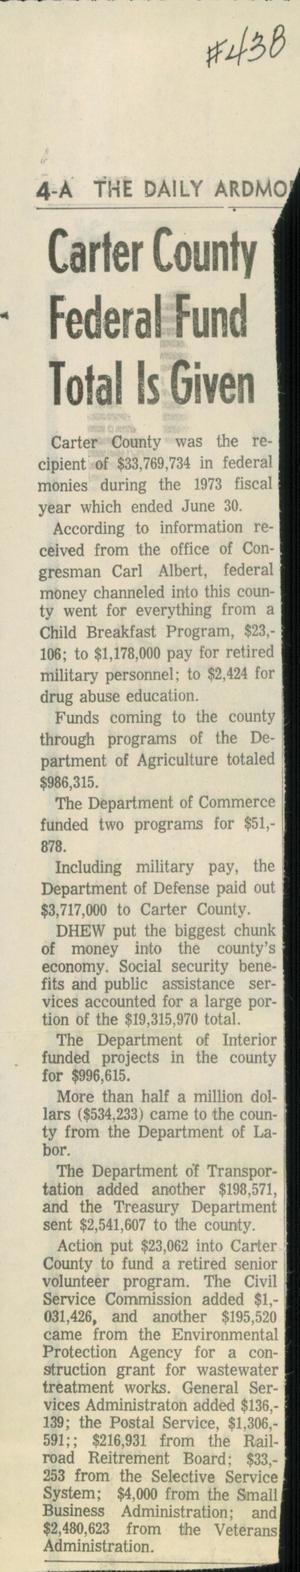 Carter County Federal Fund Total Is Given